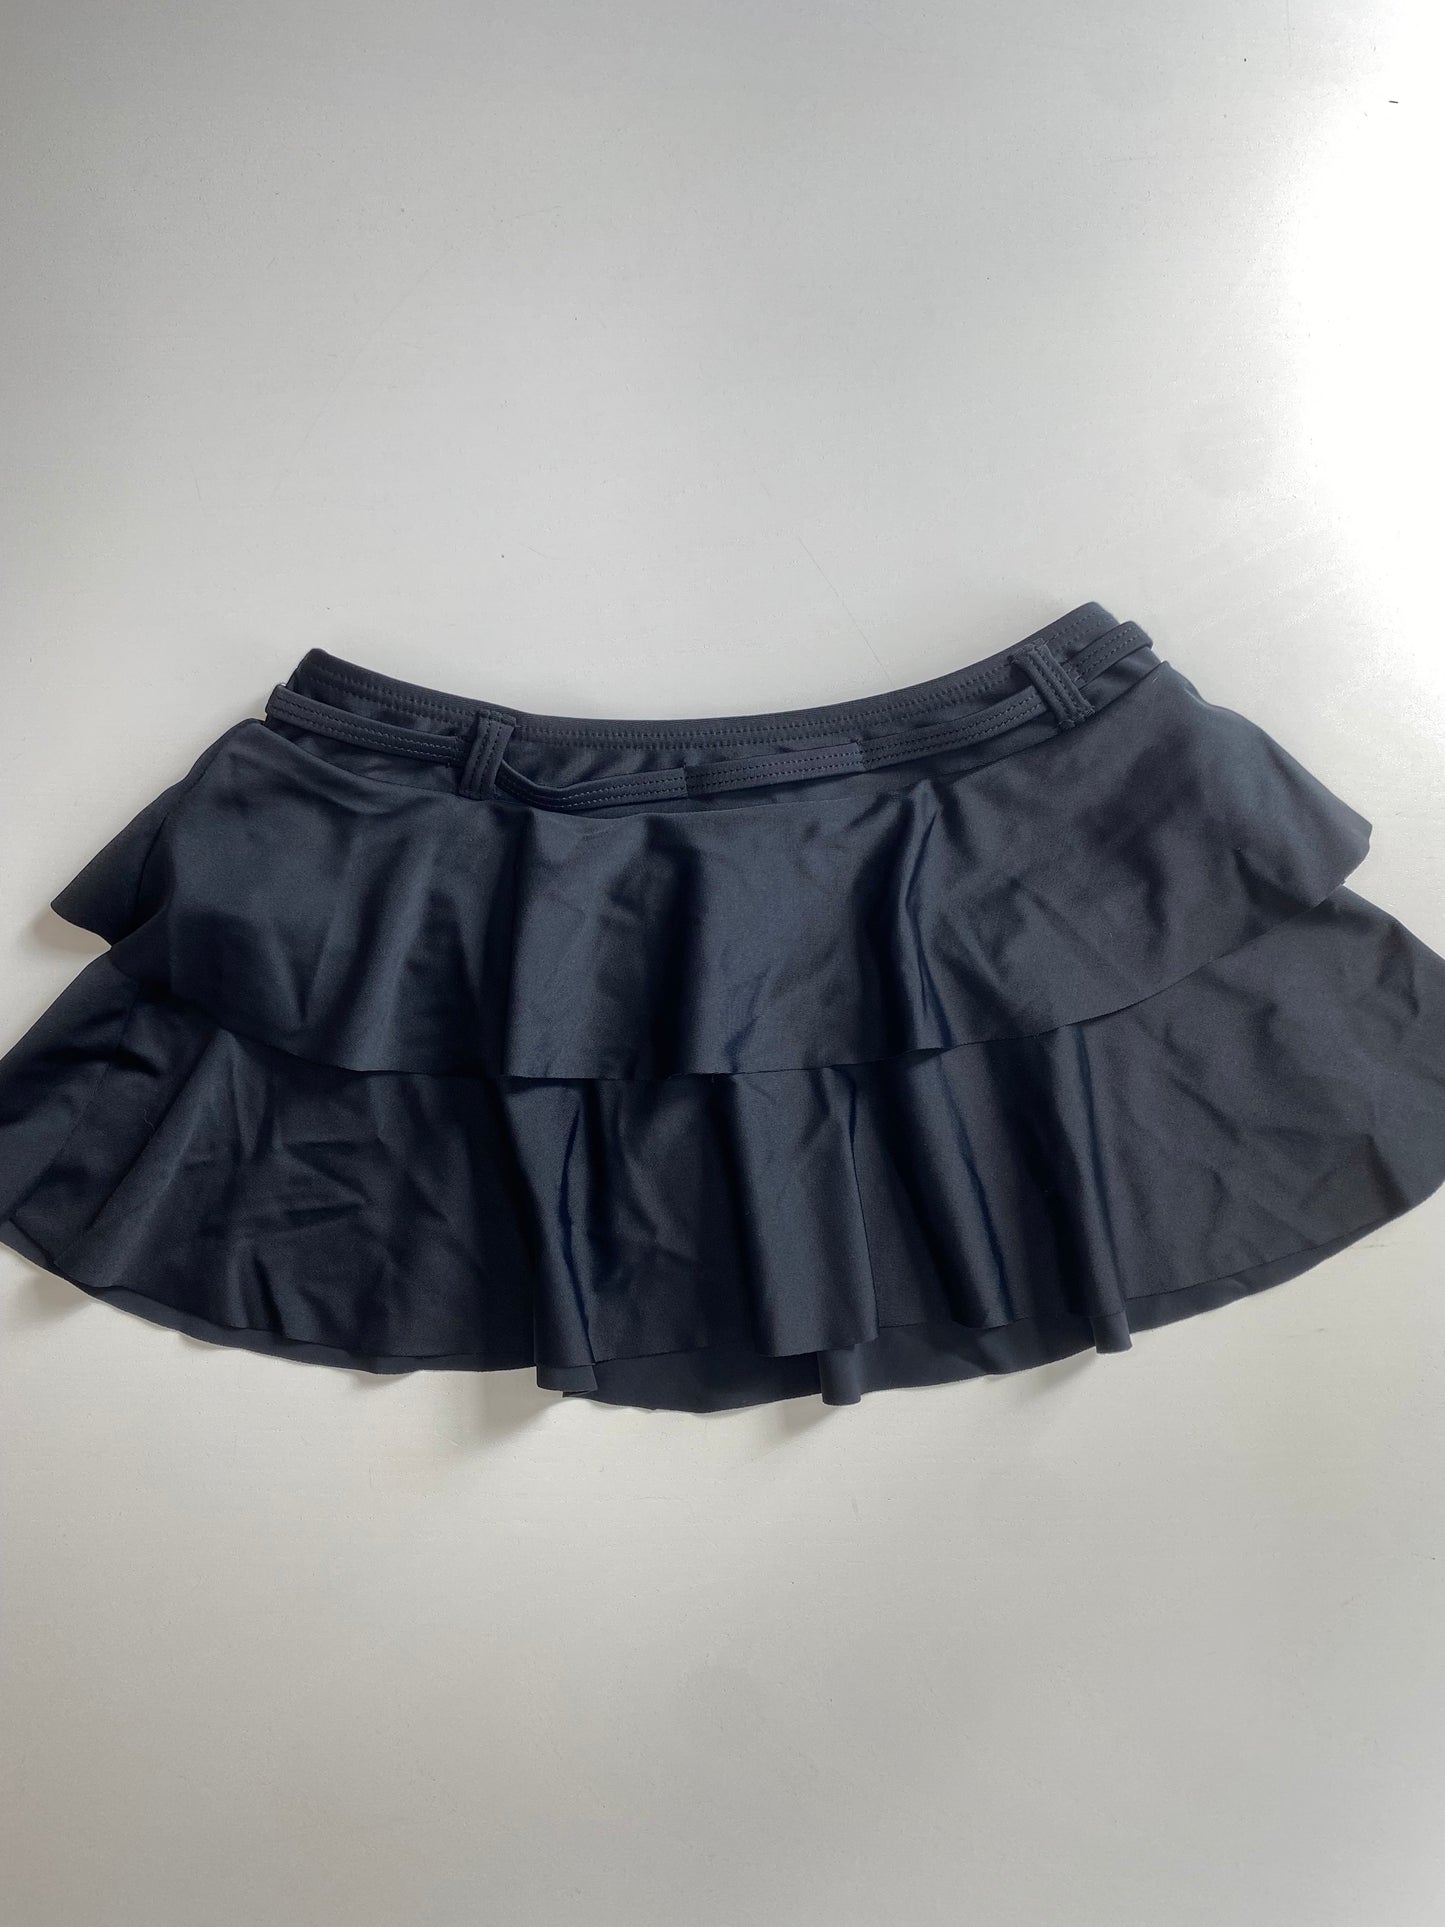 RIVER ISLAND lucre Mini skirt Size 7-8Y